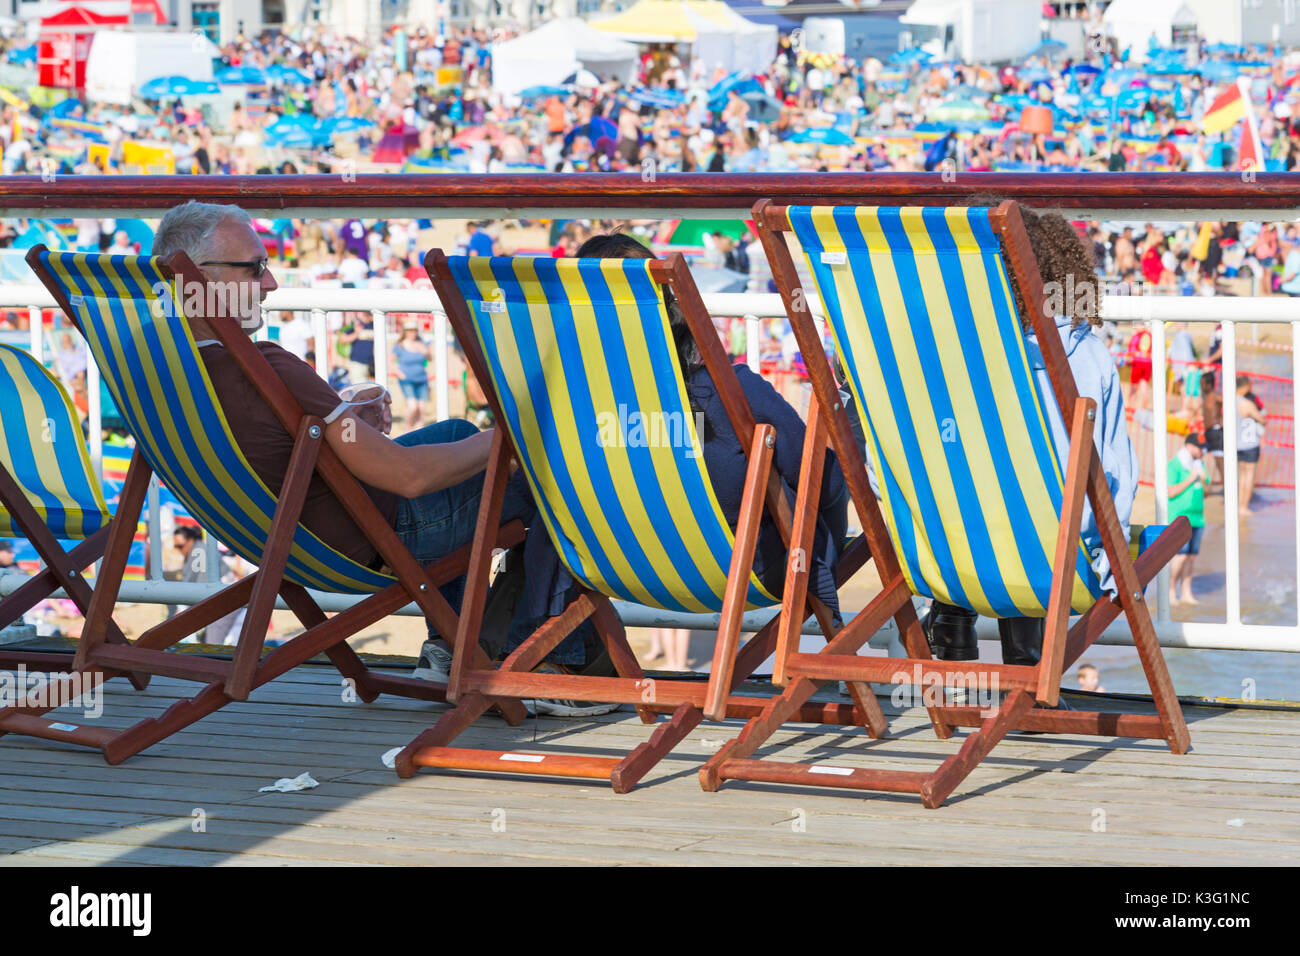 Bournemouth, Dorset, UK. 2nd Sept, 2017. UK weather: lovely warm sunny day at Bournemouth beach. Relaxing in deckchairs on Bournemouth breach with crowded beach. Credit: Carolyn Jenkins/Alamy Live News Stock Photo